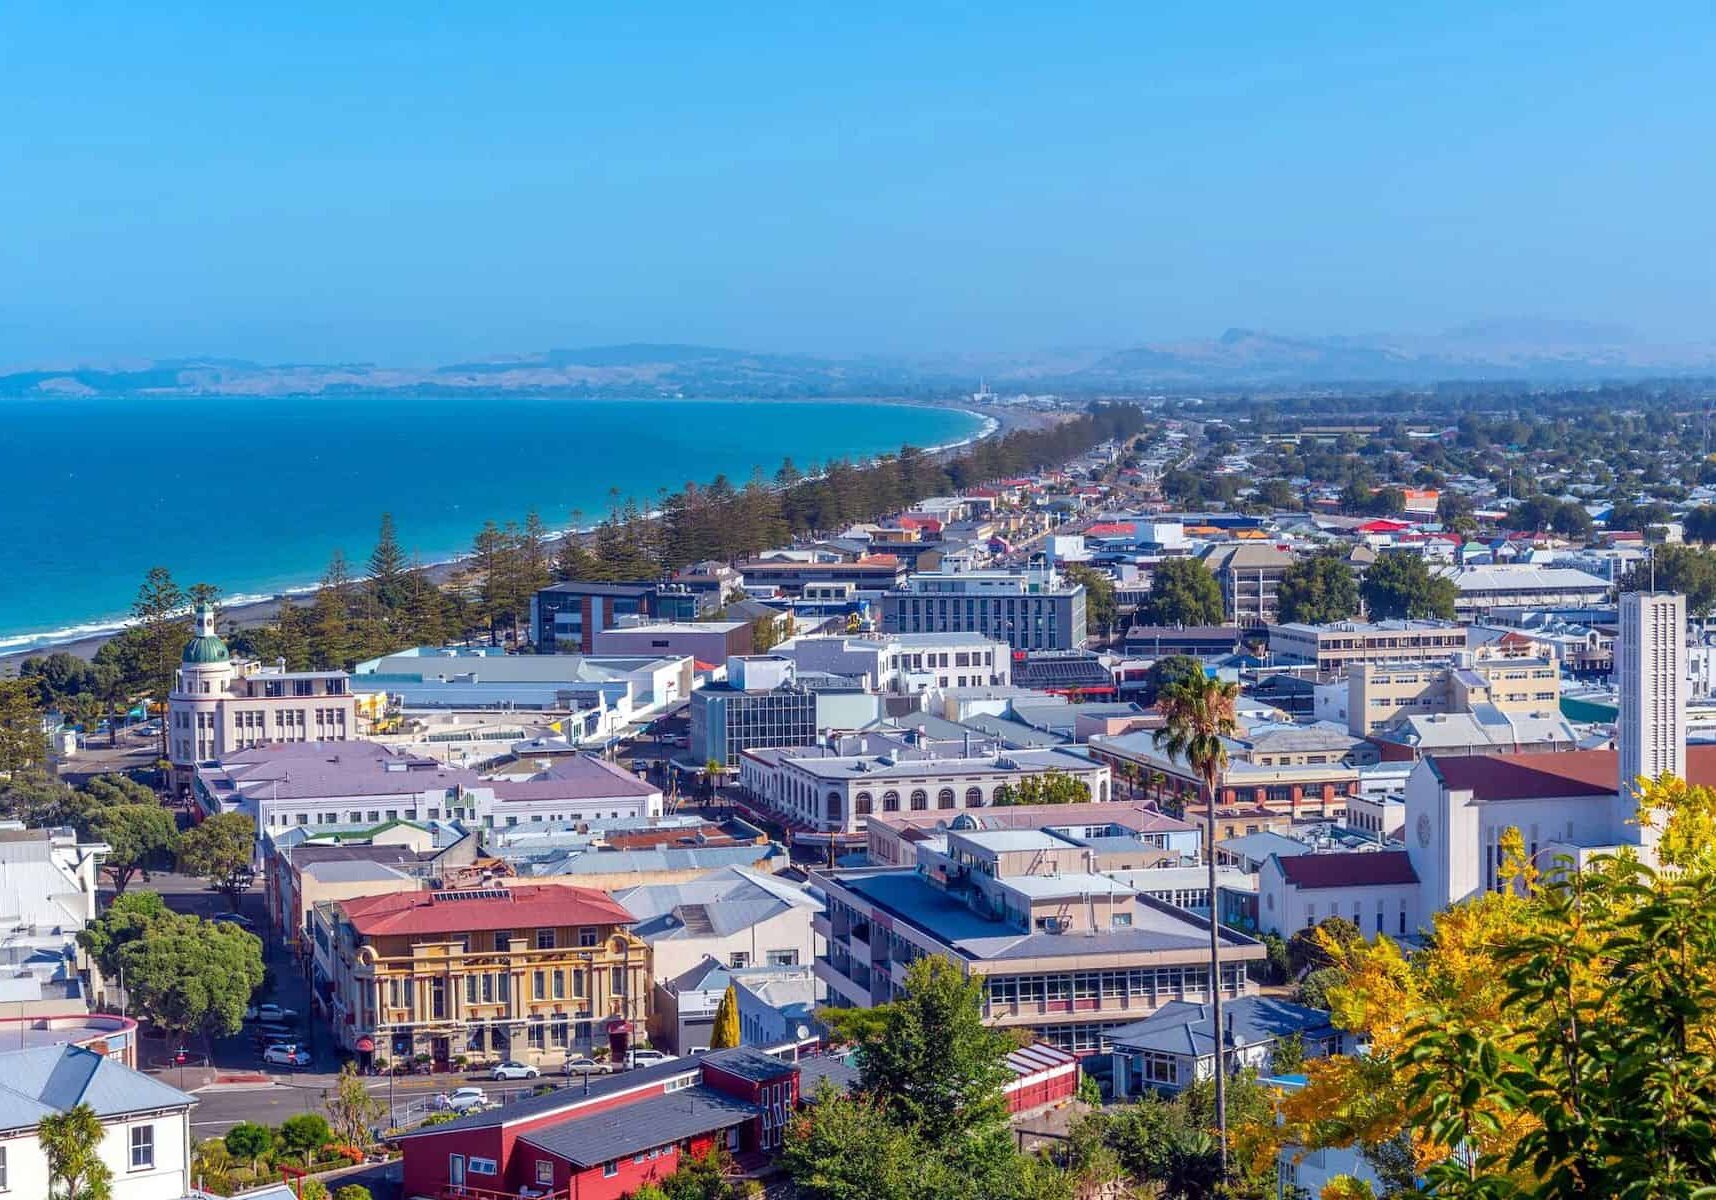 Enjoy Napier: another amazing place to be